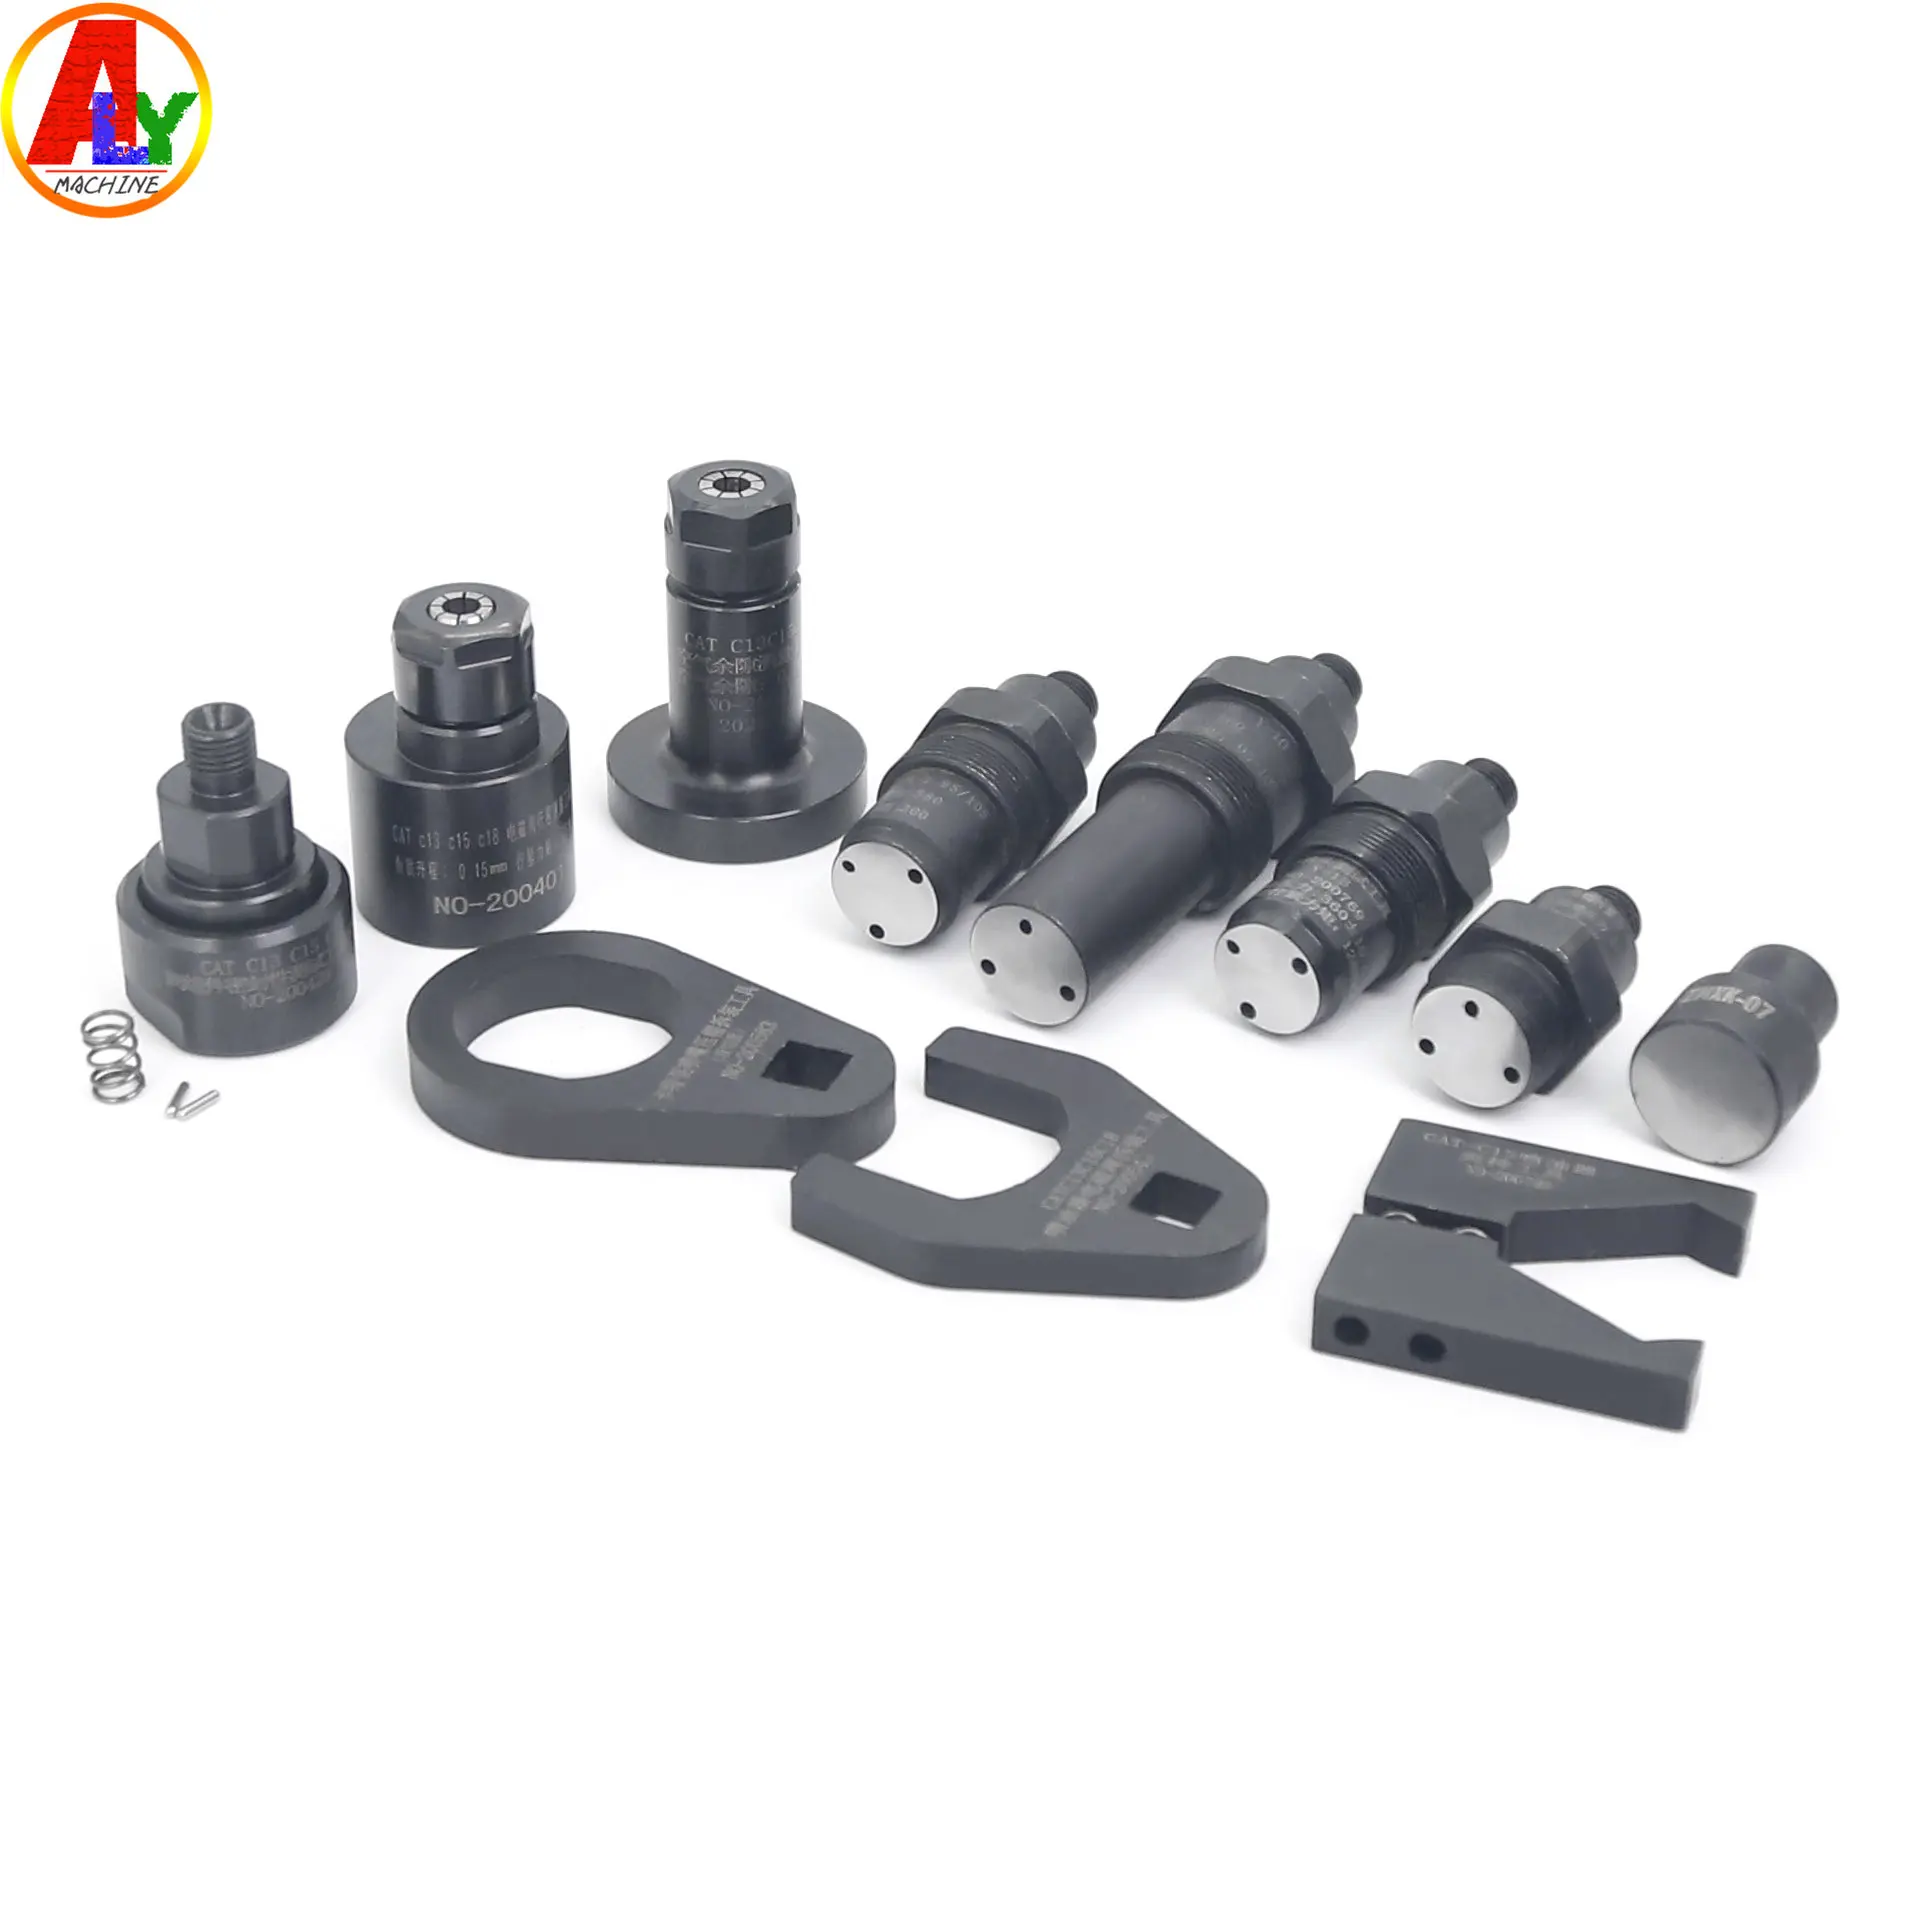 

10PCS EUI EUP Tool Diesel Injector Disassembly Dynamic Travel Measuring Clamp Fixture Tools for Cat C13 C15 C18